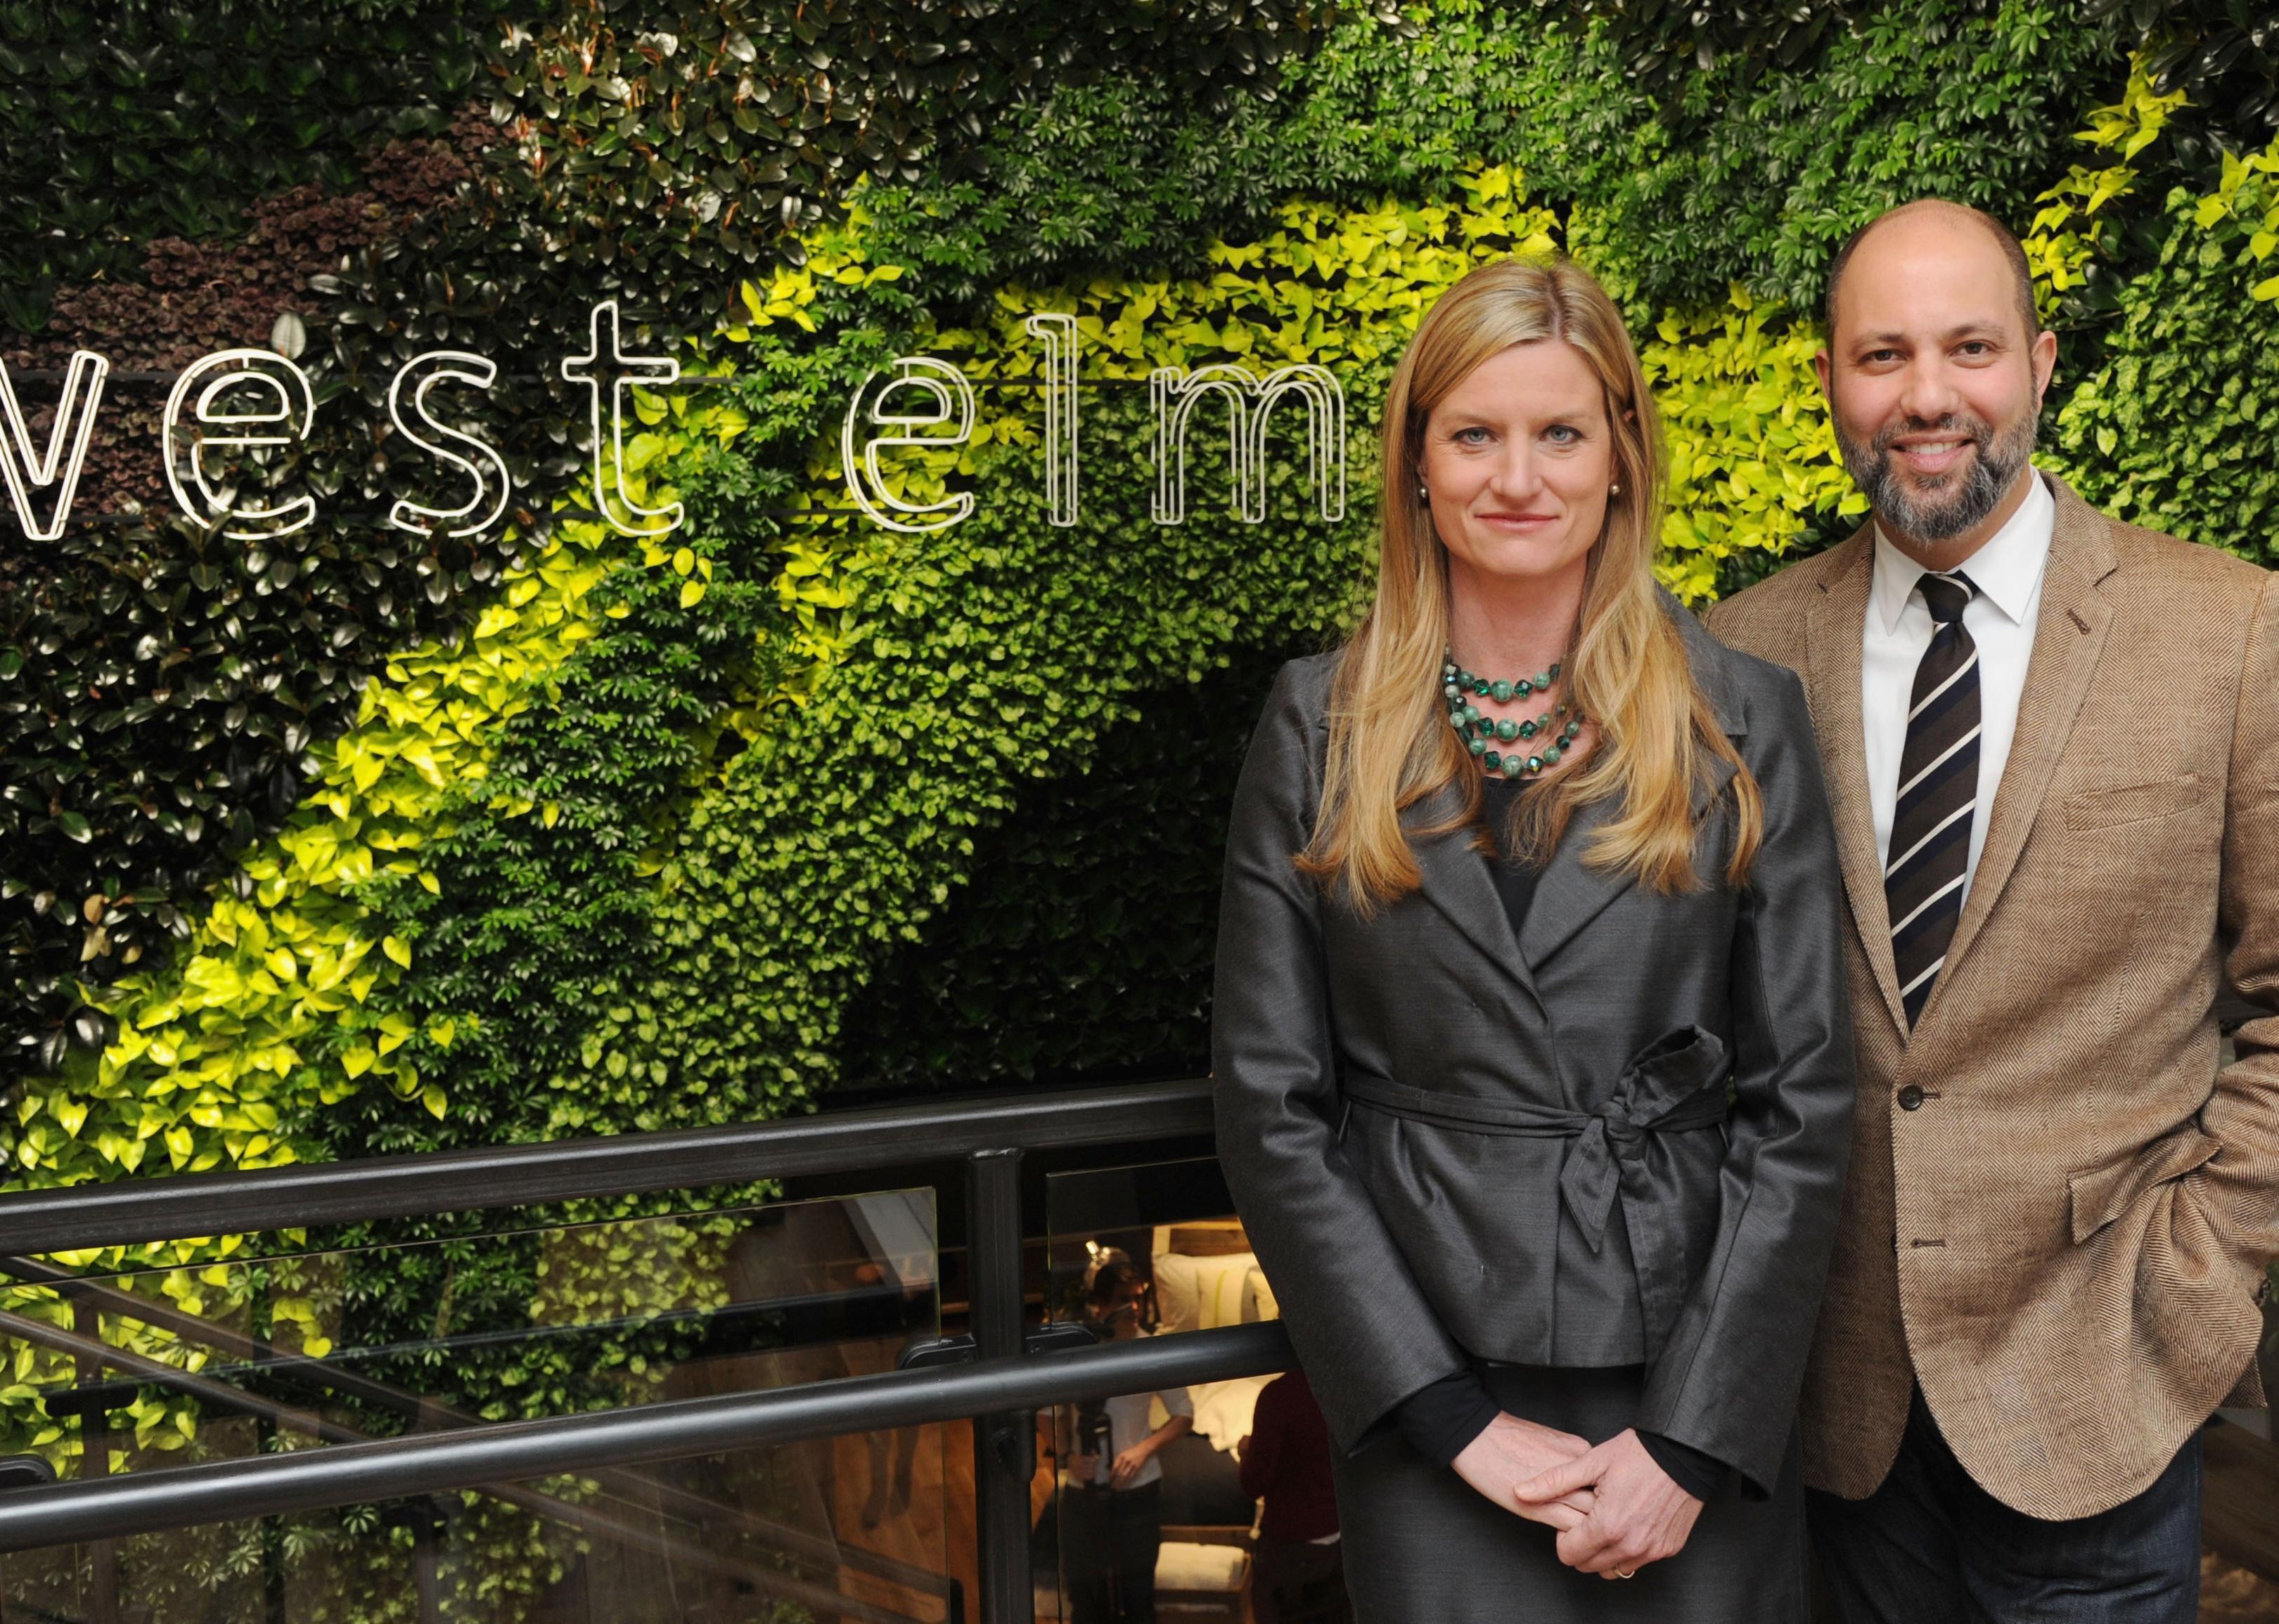 Laura Alber and Jim Brett in front of a West Elm sign in greenery.